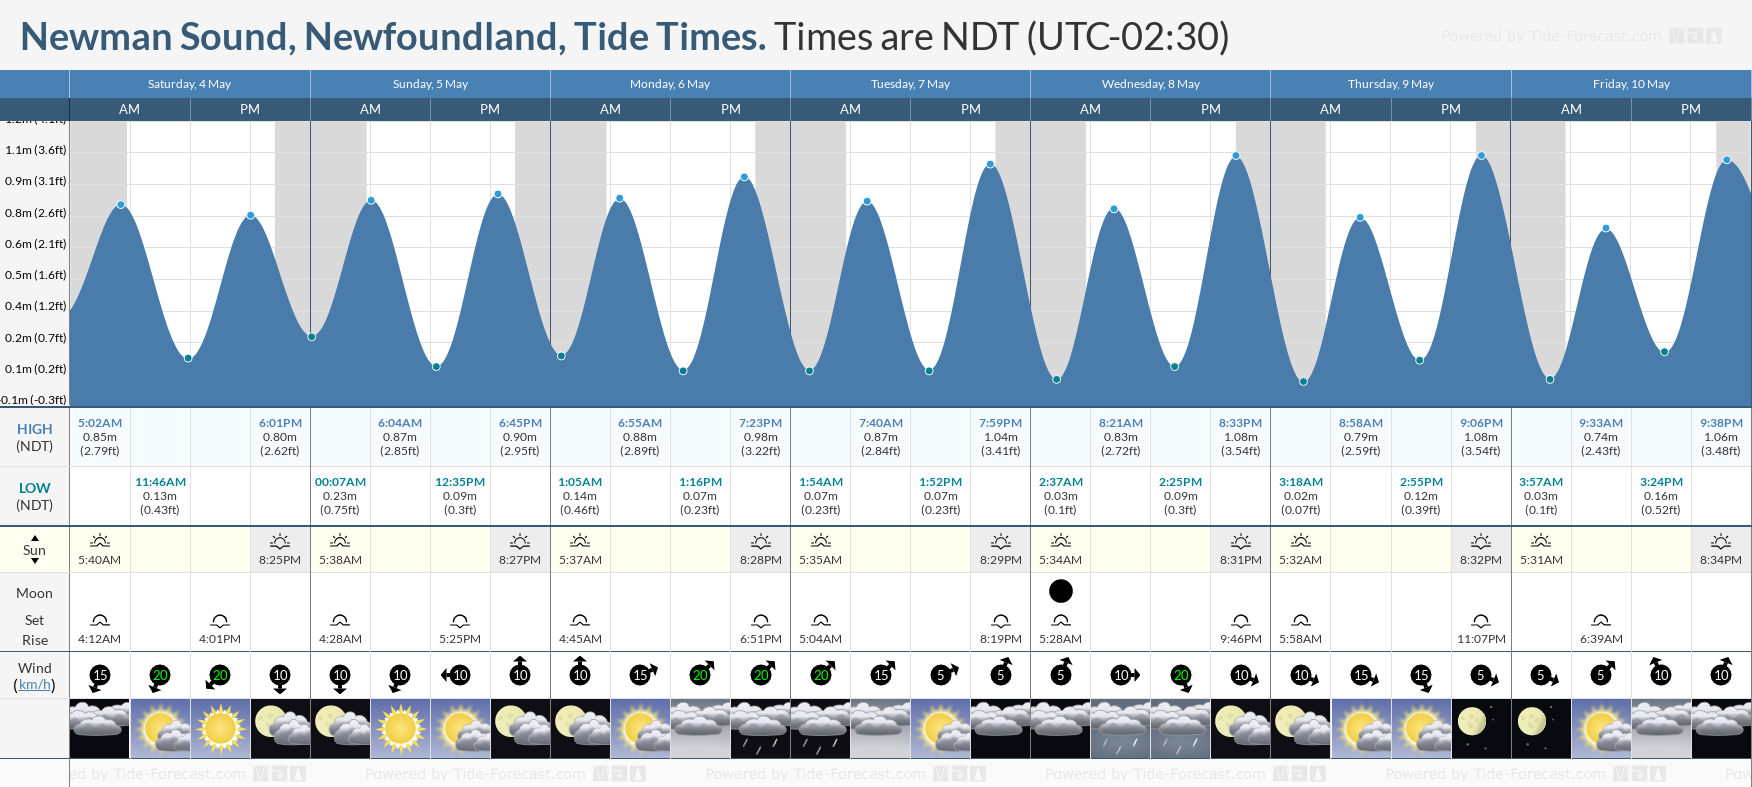 Newman Sound, Newfoundland Tide Chart including high and low tide tide times for the next 7 days